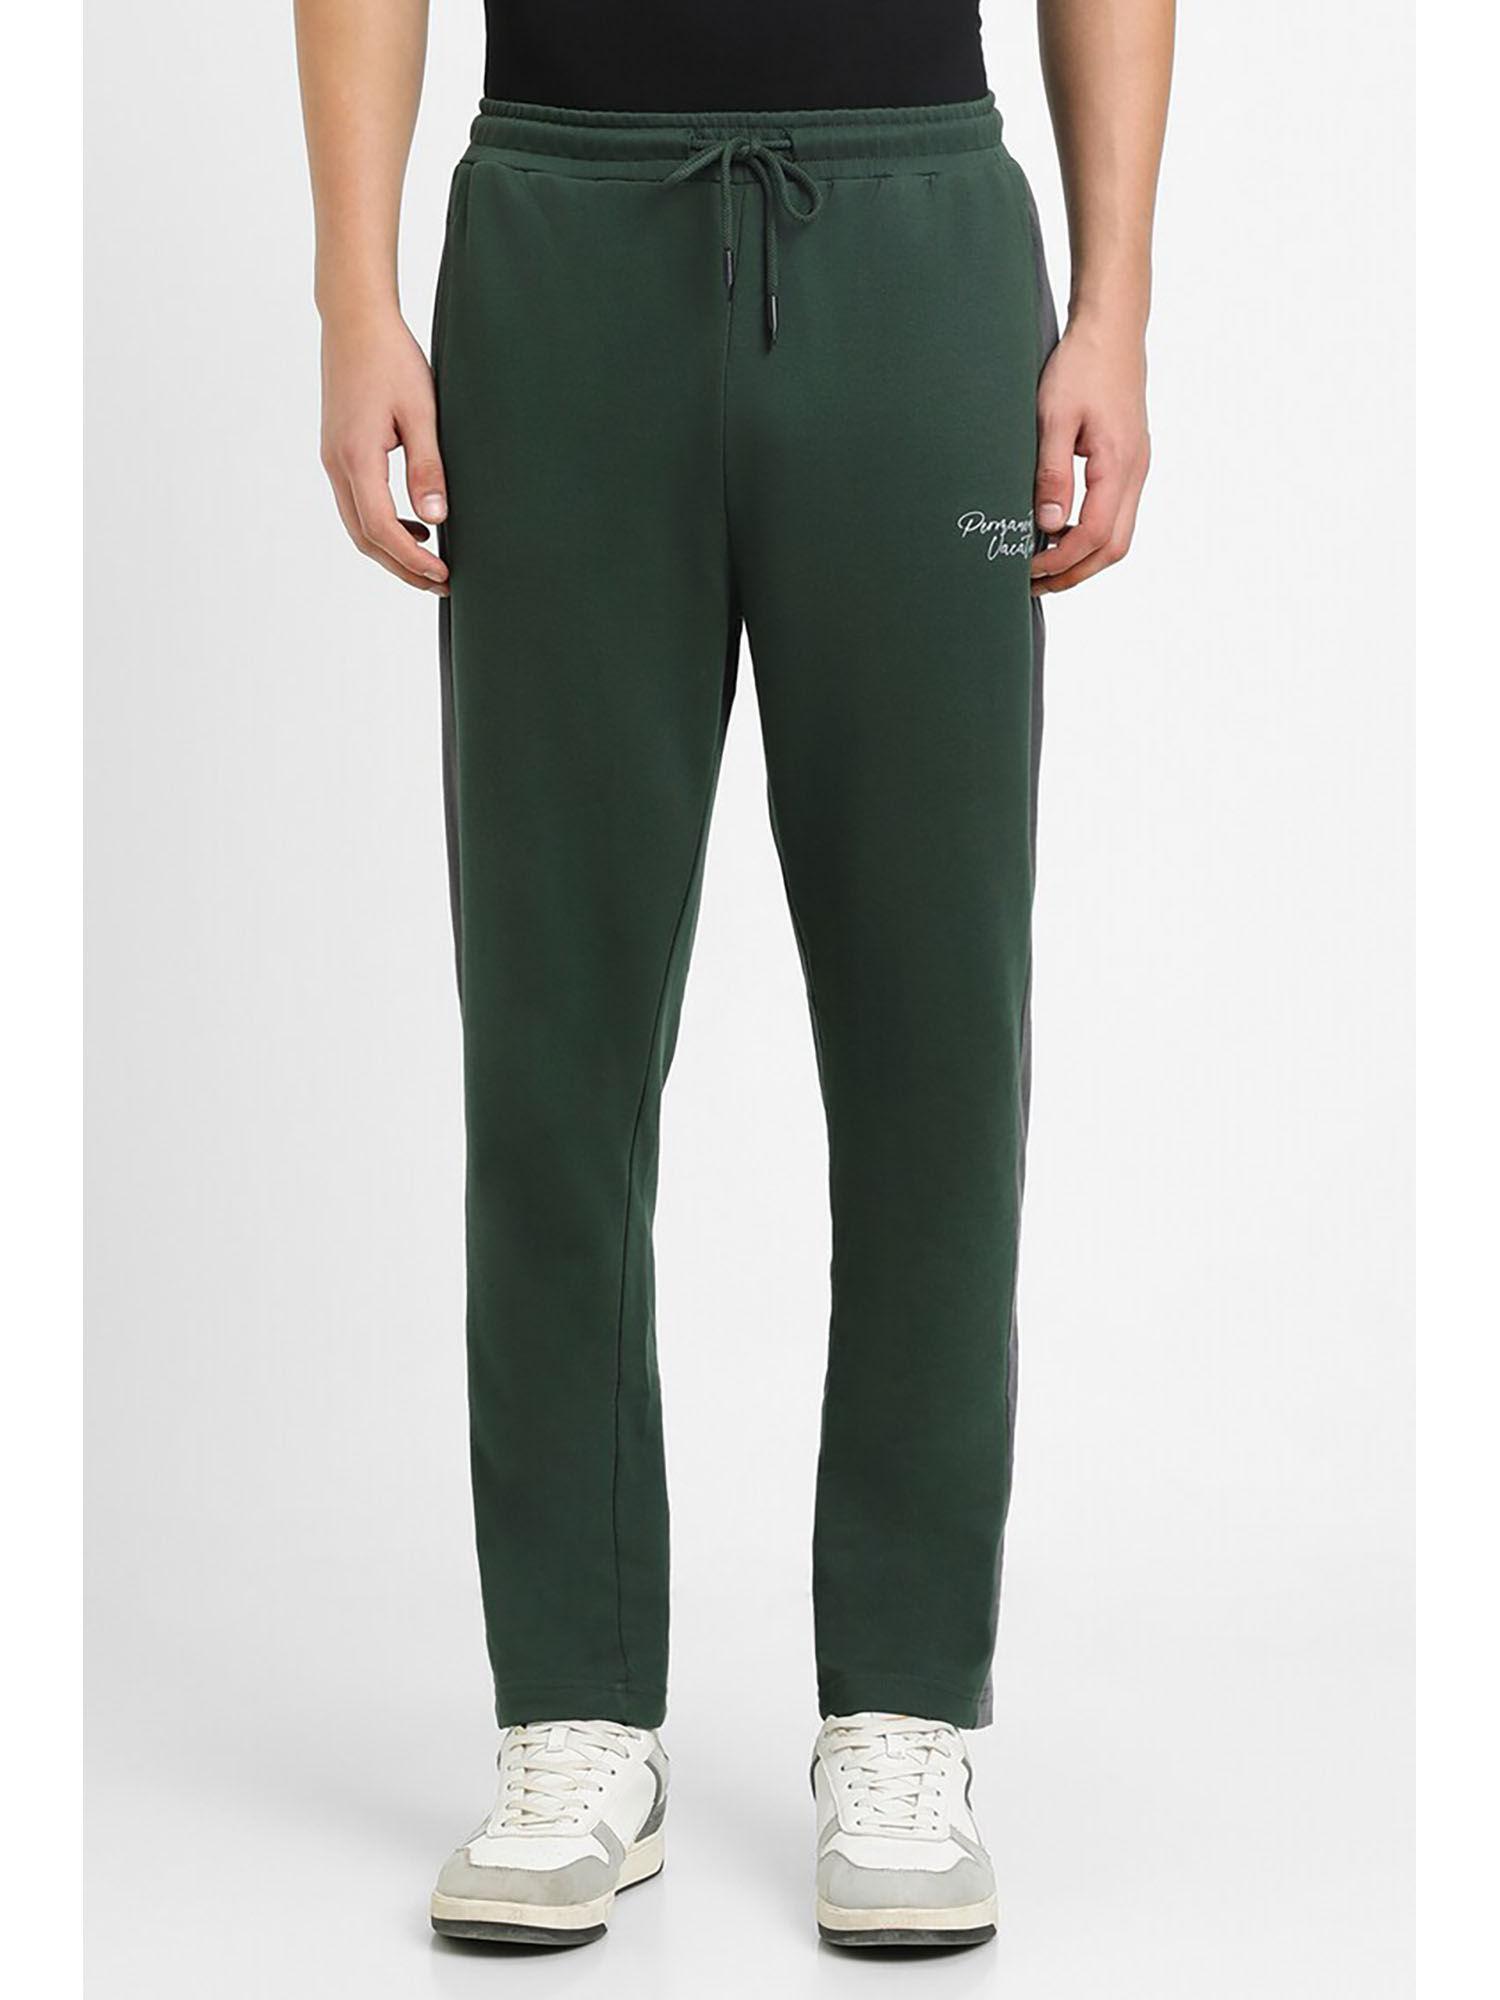 green-solid-track-pant